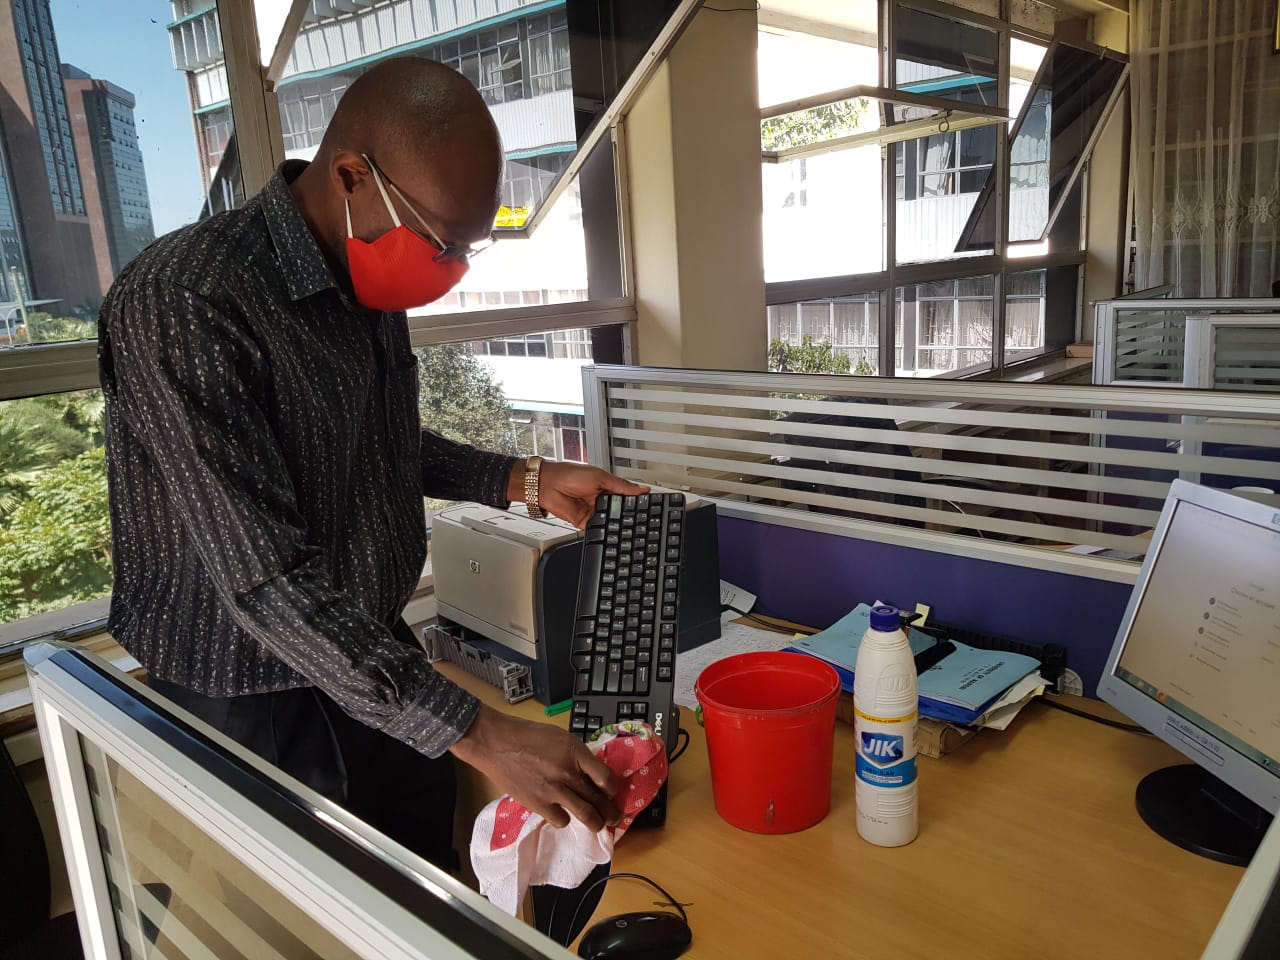 James Langi a support staff from internal audit carrying out sanitisation of office equipment and surfaces as a precaution measure to prevent spread of Corona virus. Attachments area